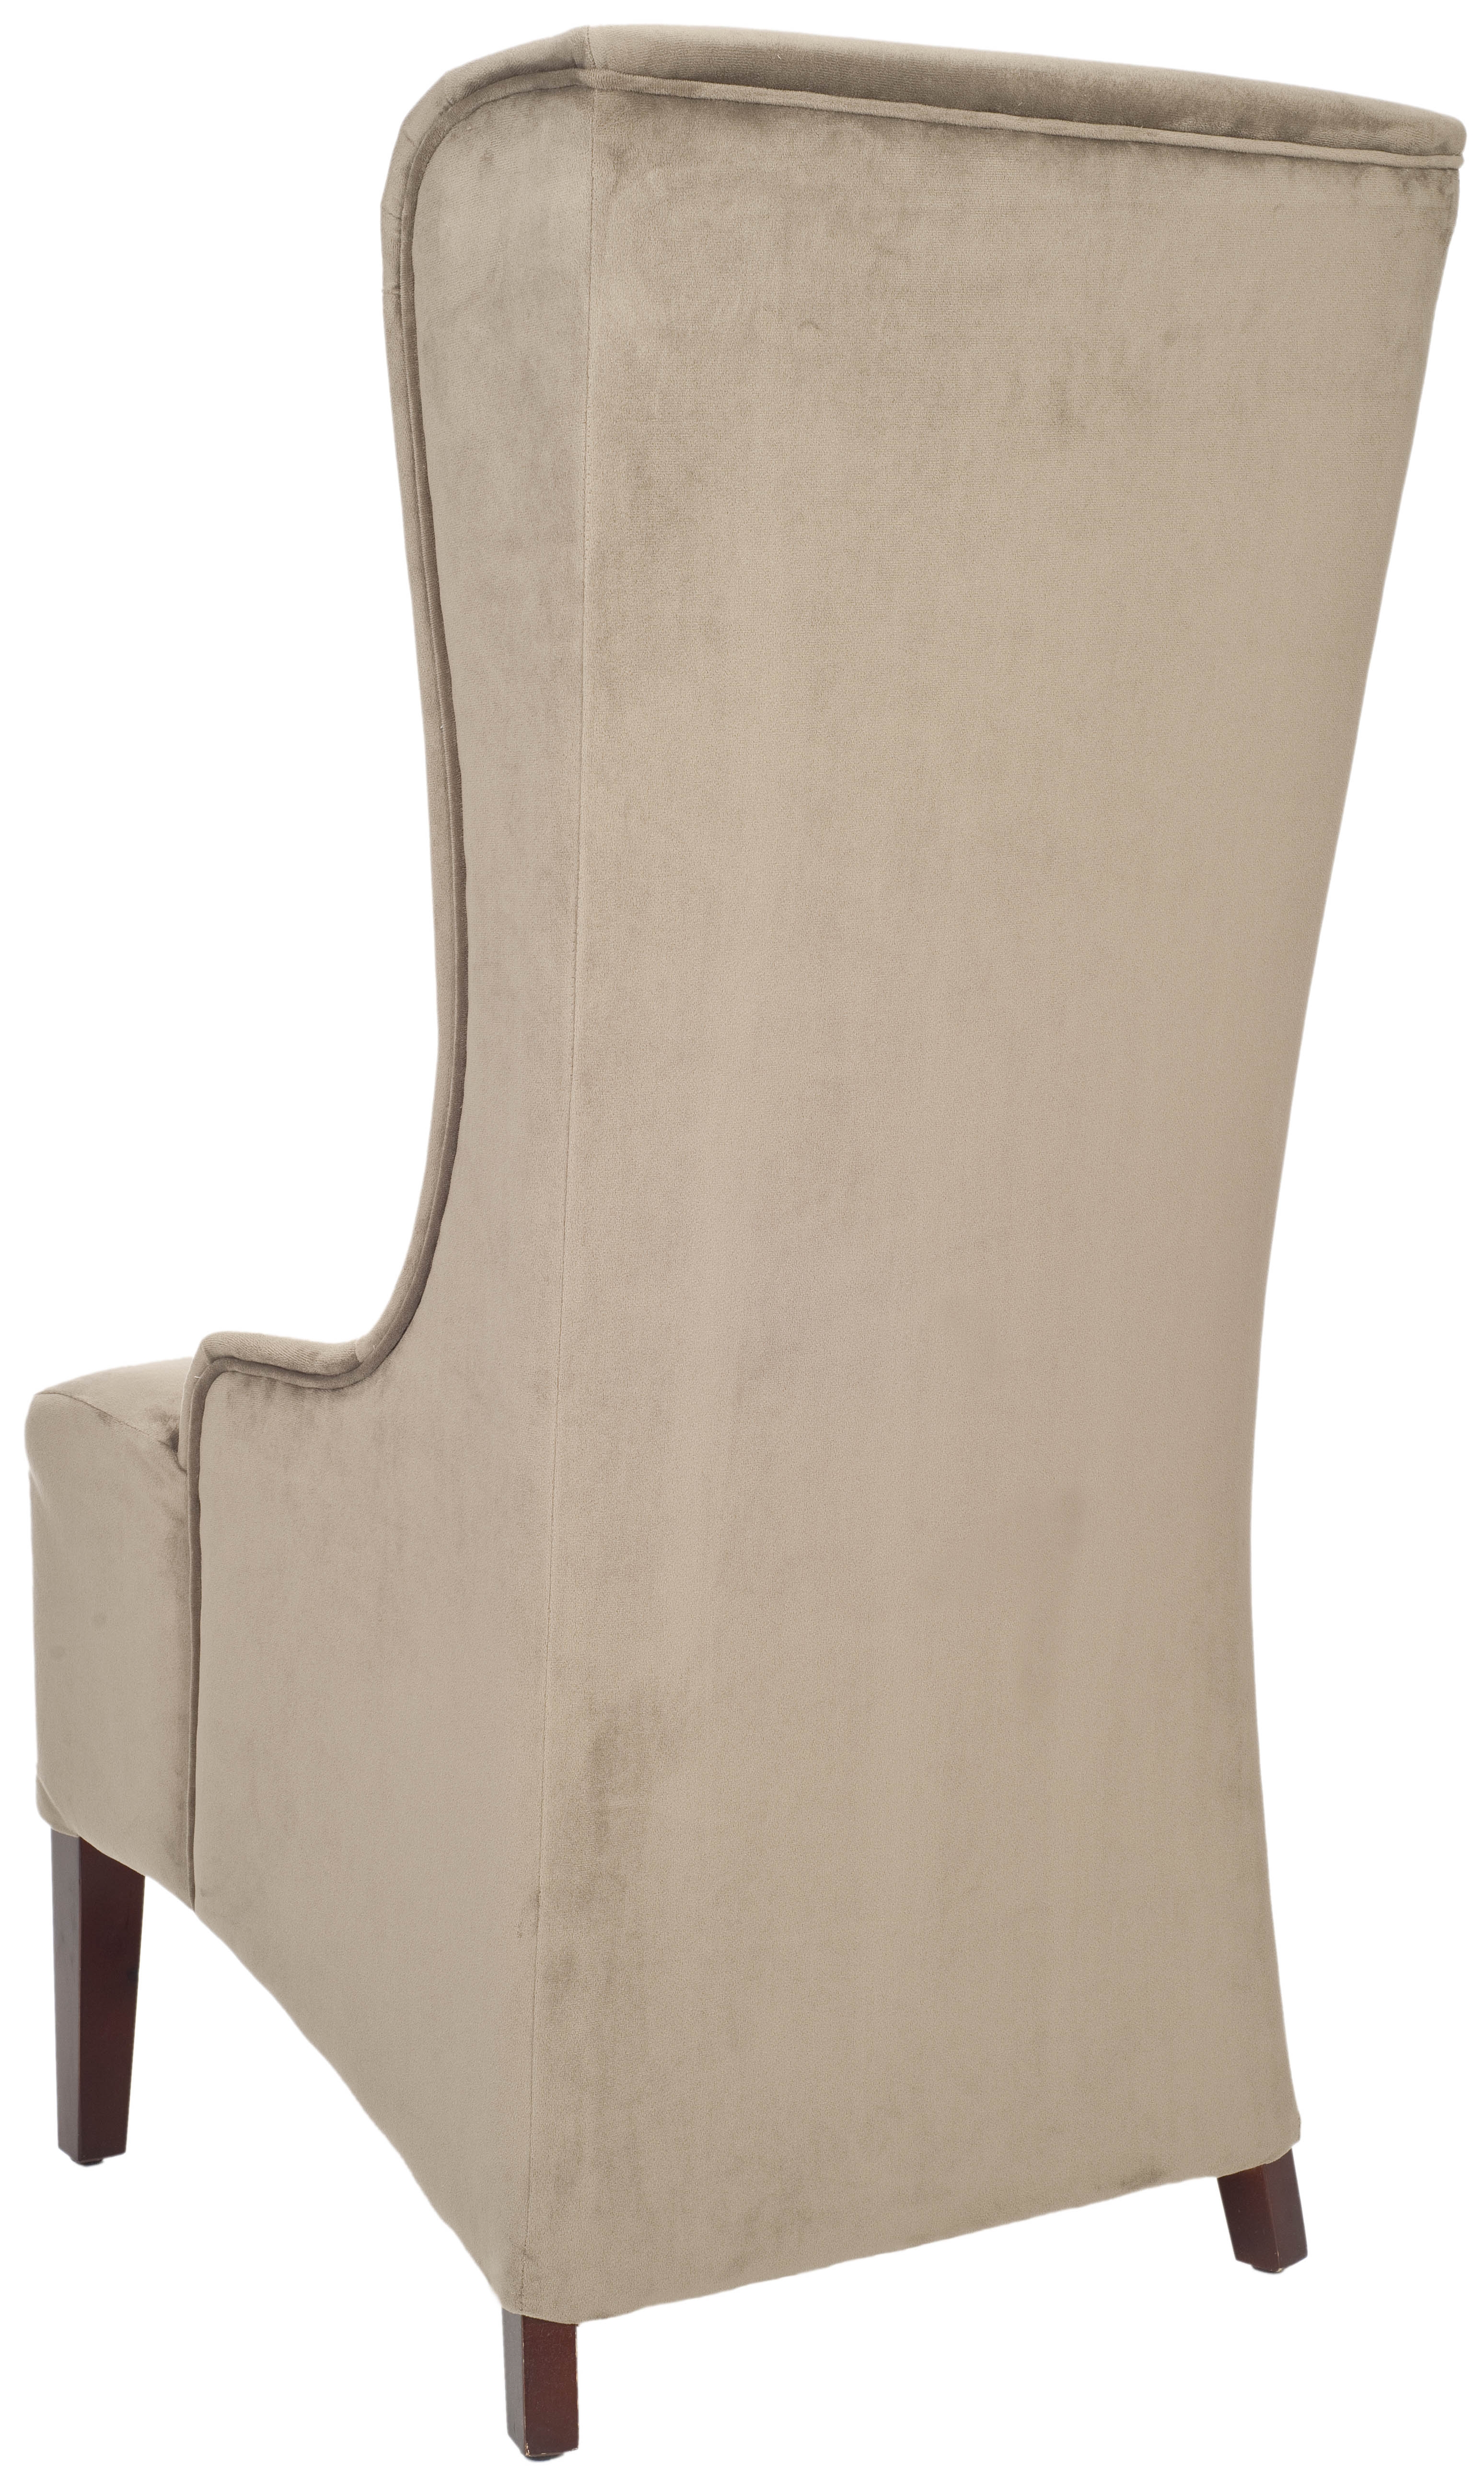 Becall 20''H Cotton Dining Chair - Mushroom Taupe/Cherry Mahogany - Arlo Home - Image 2